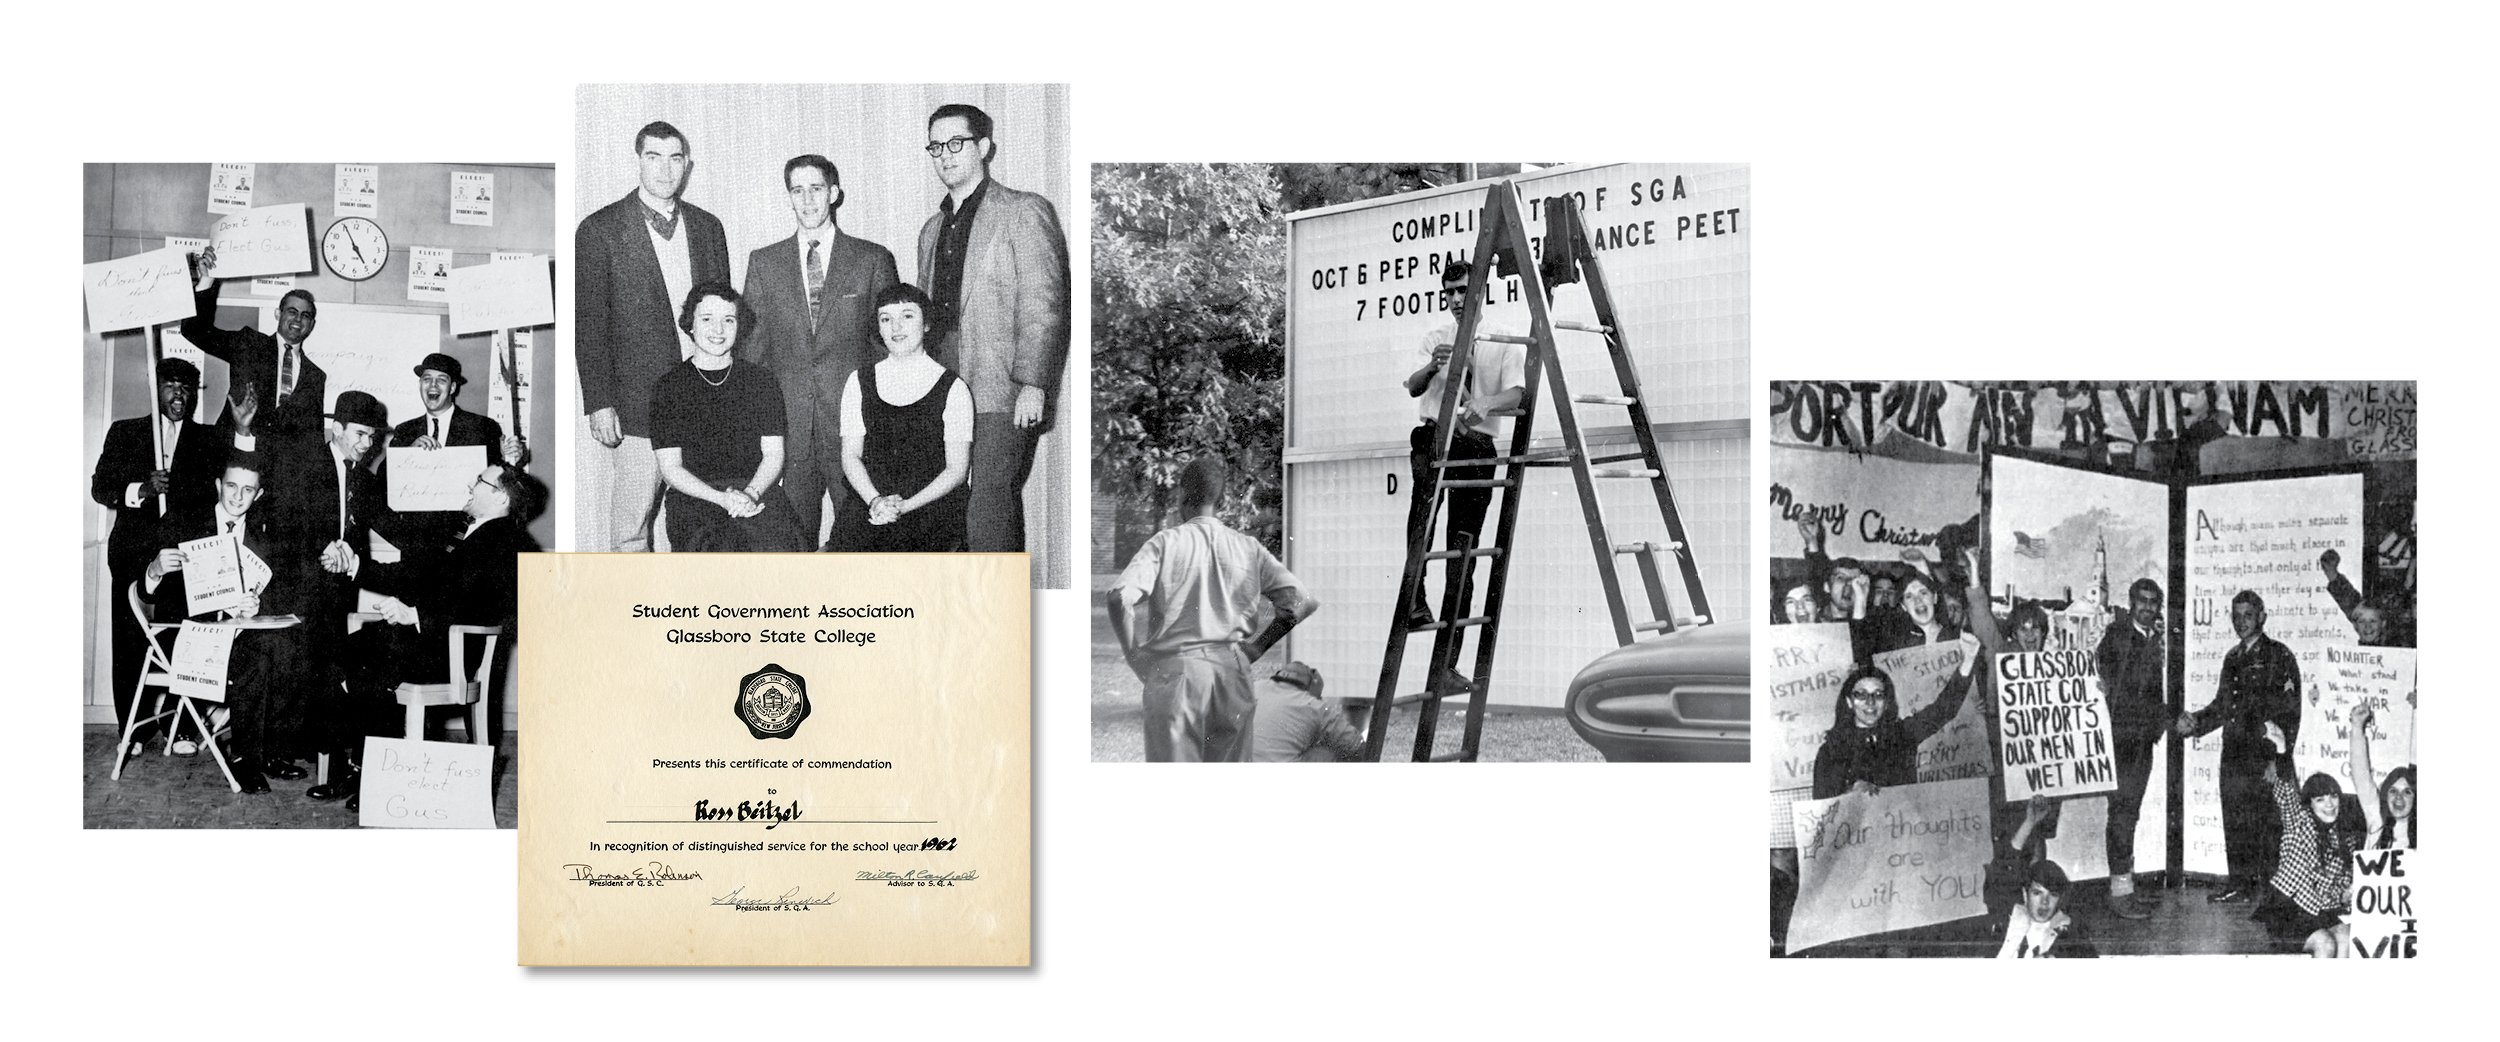 Photos from the Glassboro State College Student Government Association and a certificate of commendation to Ross Beitzel in 1962.